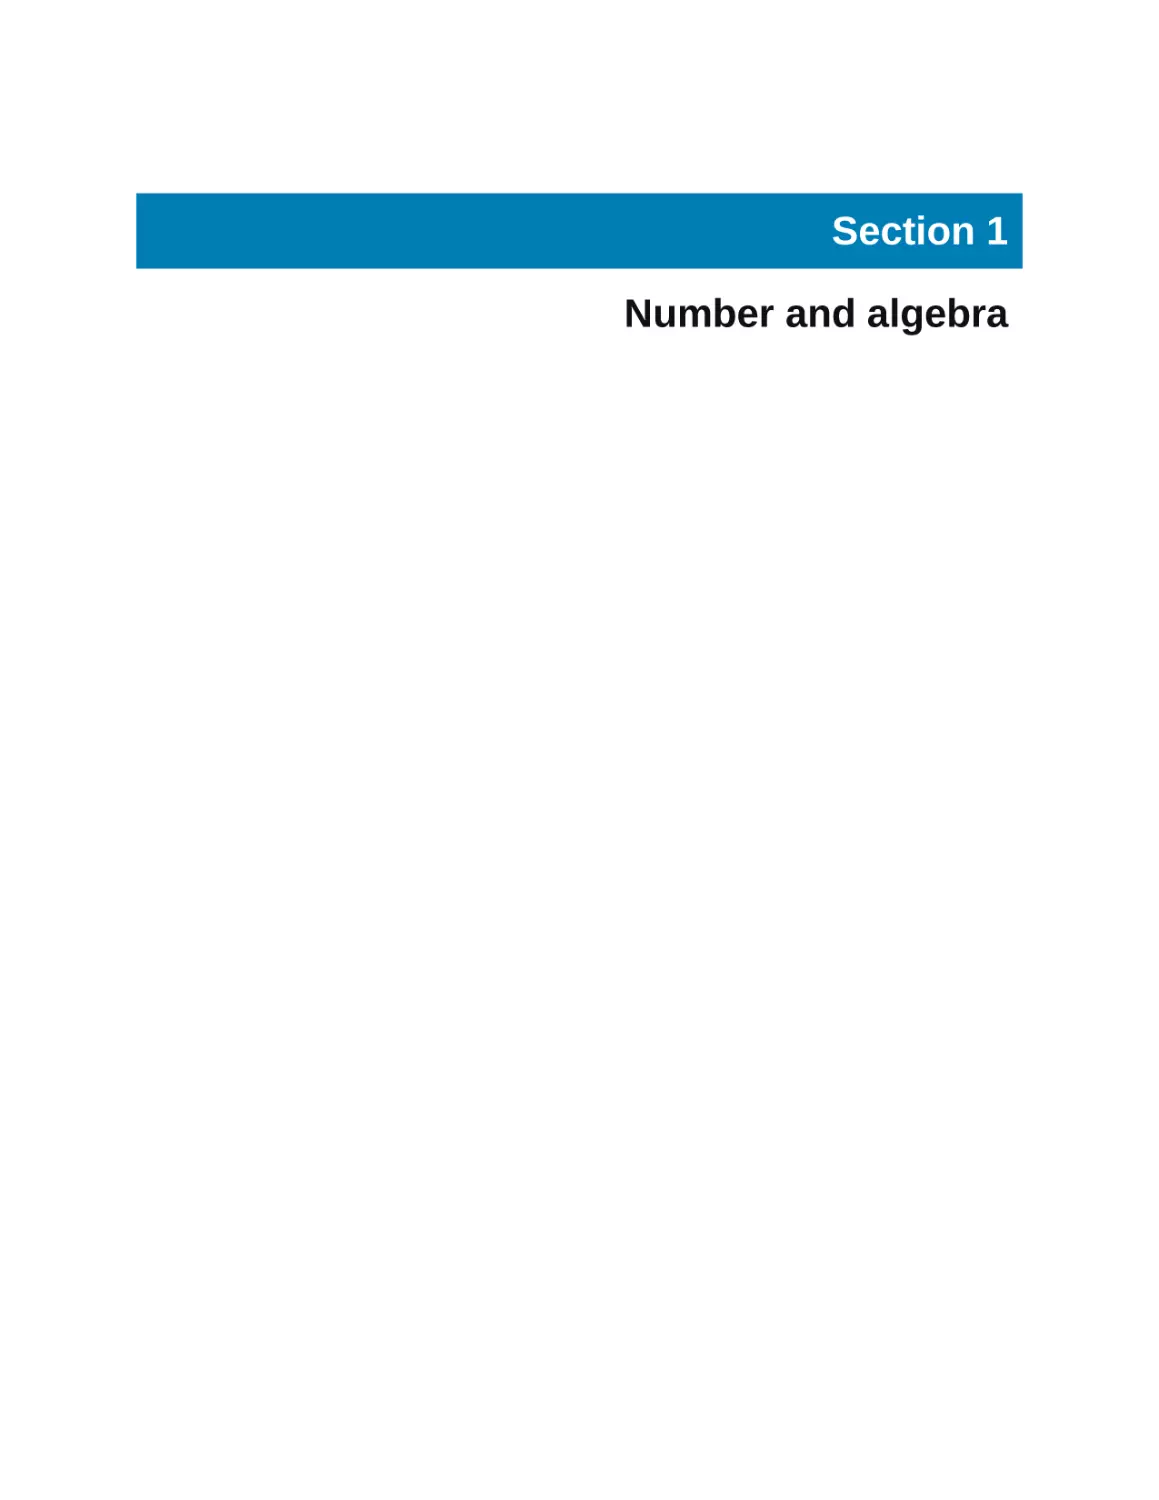 Section 1 Number and algebra